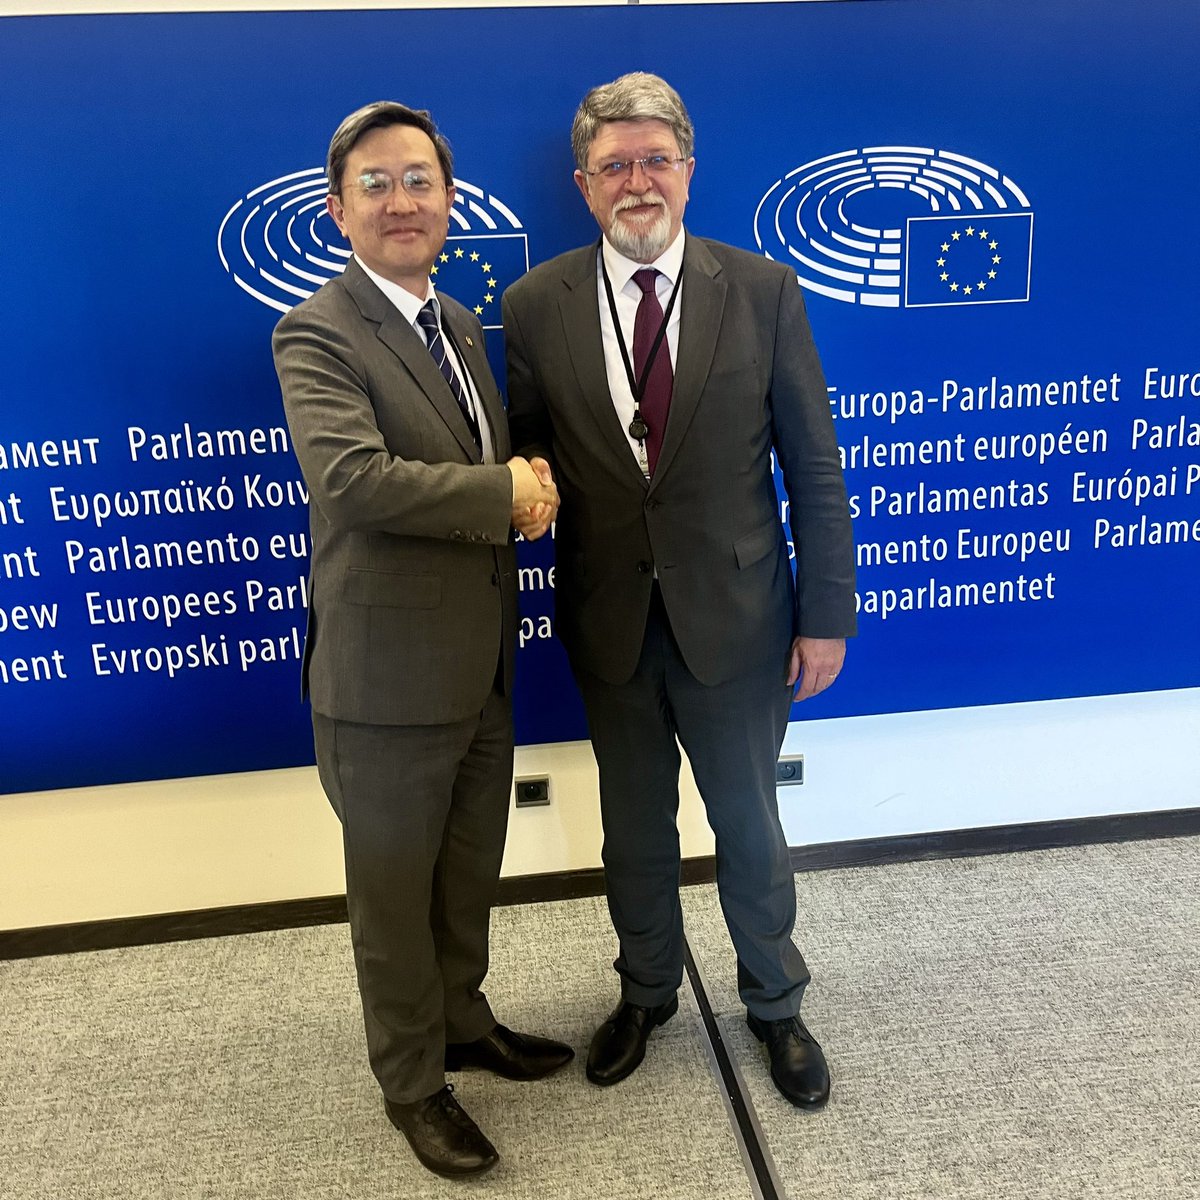 Meeting in @Europarl_EN with Dr. Roy Chun Lee, Representative of @TaiwanEU. I emphasized the continuity of good cooperation between the European Parliament and Taiwan, especially after the historic visit of @EP_ForeignAff to Taiwan last year.